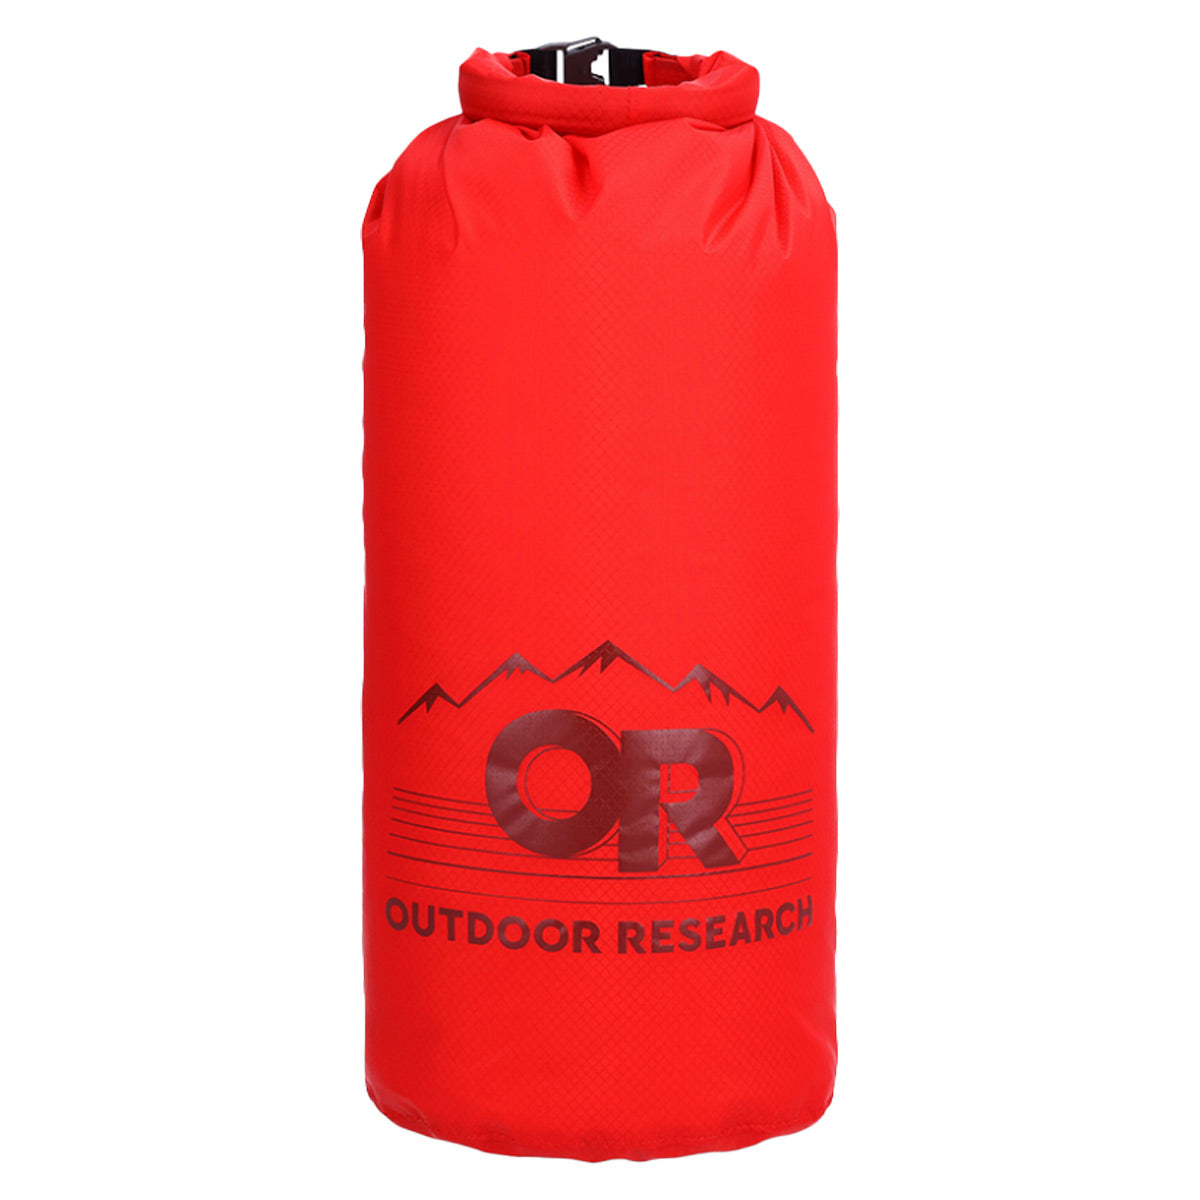 Outdoor Research Packout Graphic Dry Bag in  by GOHUNT | Outdoor Research - GOHUNT Shop